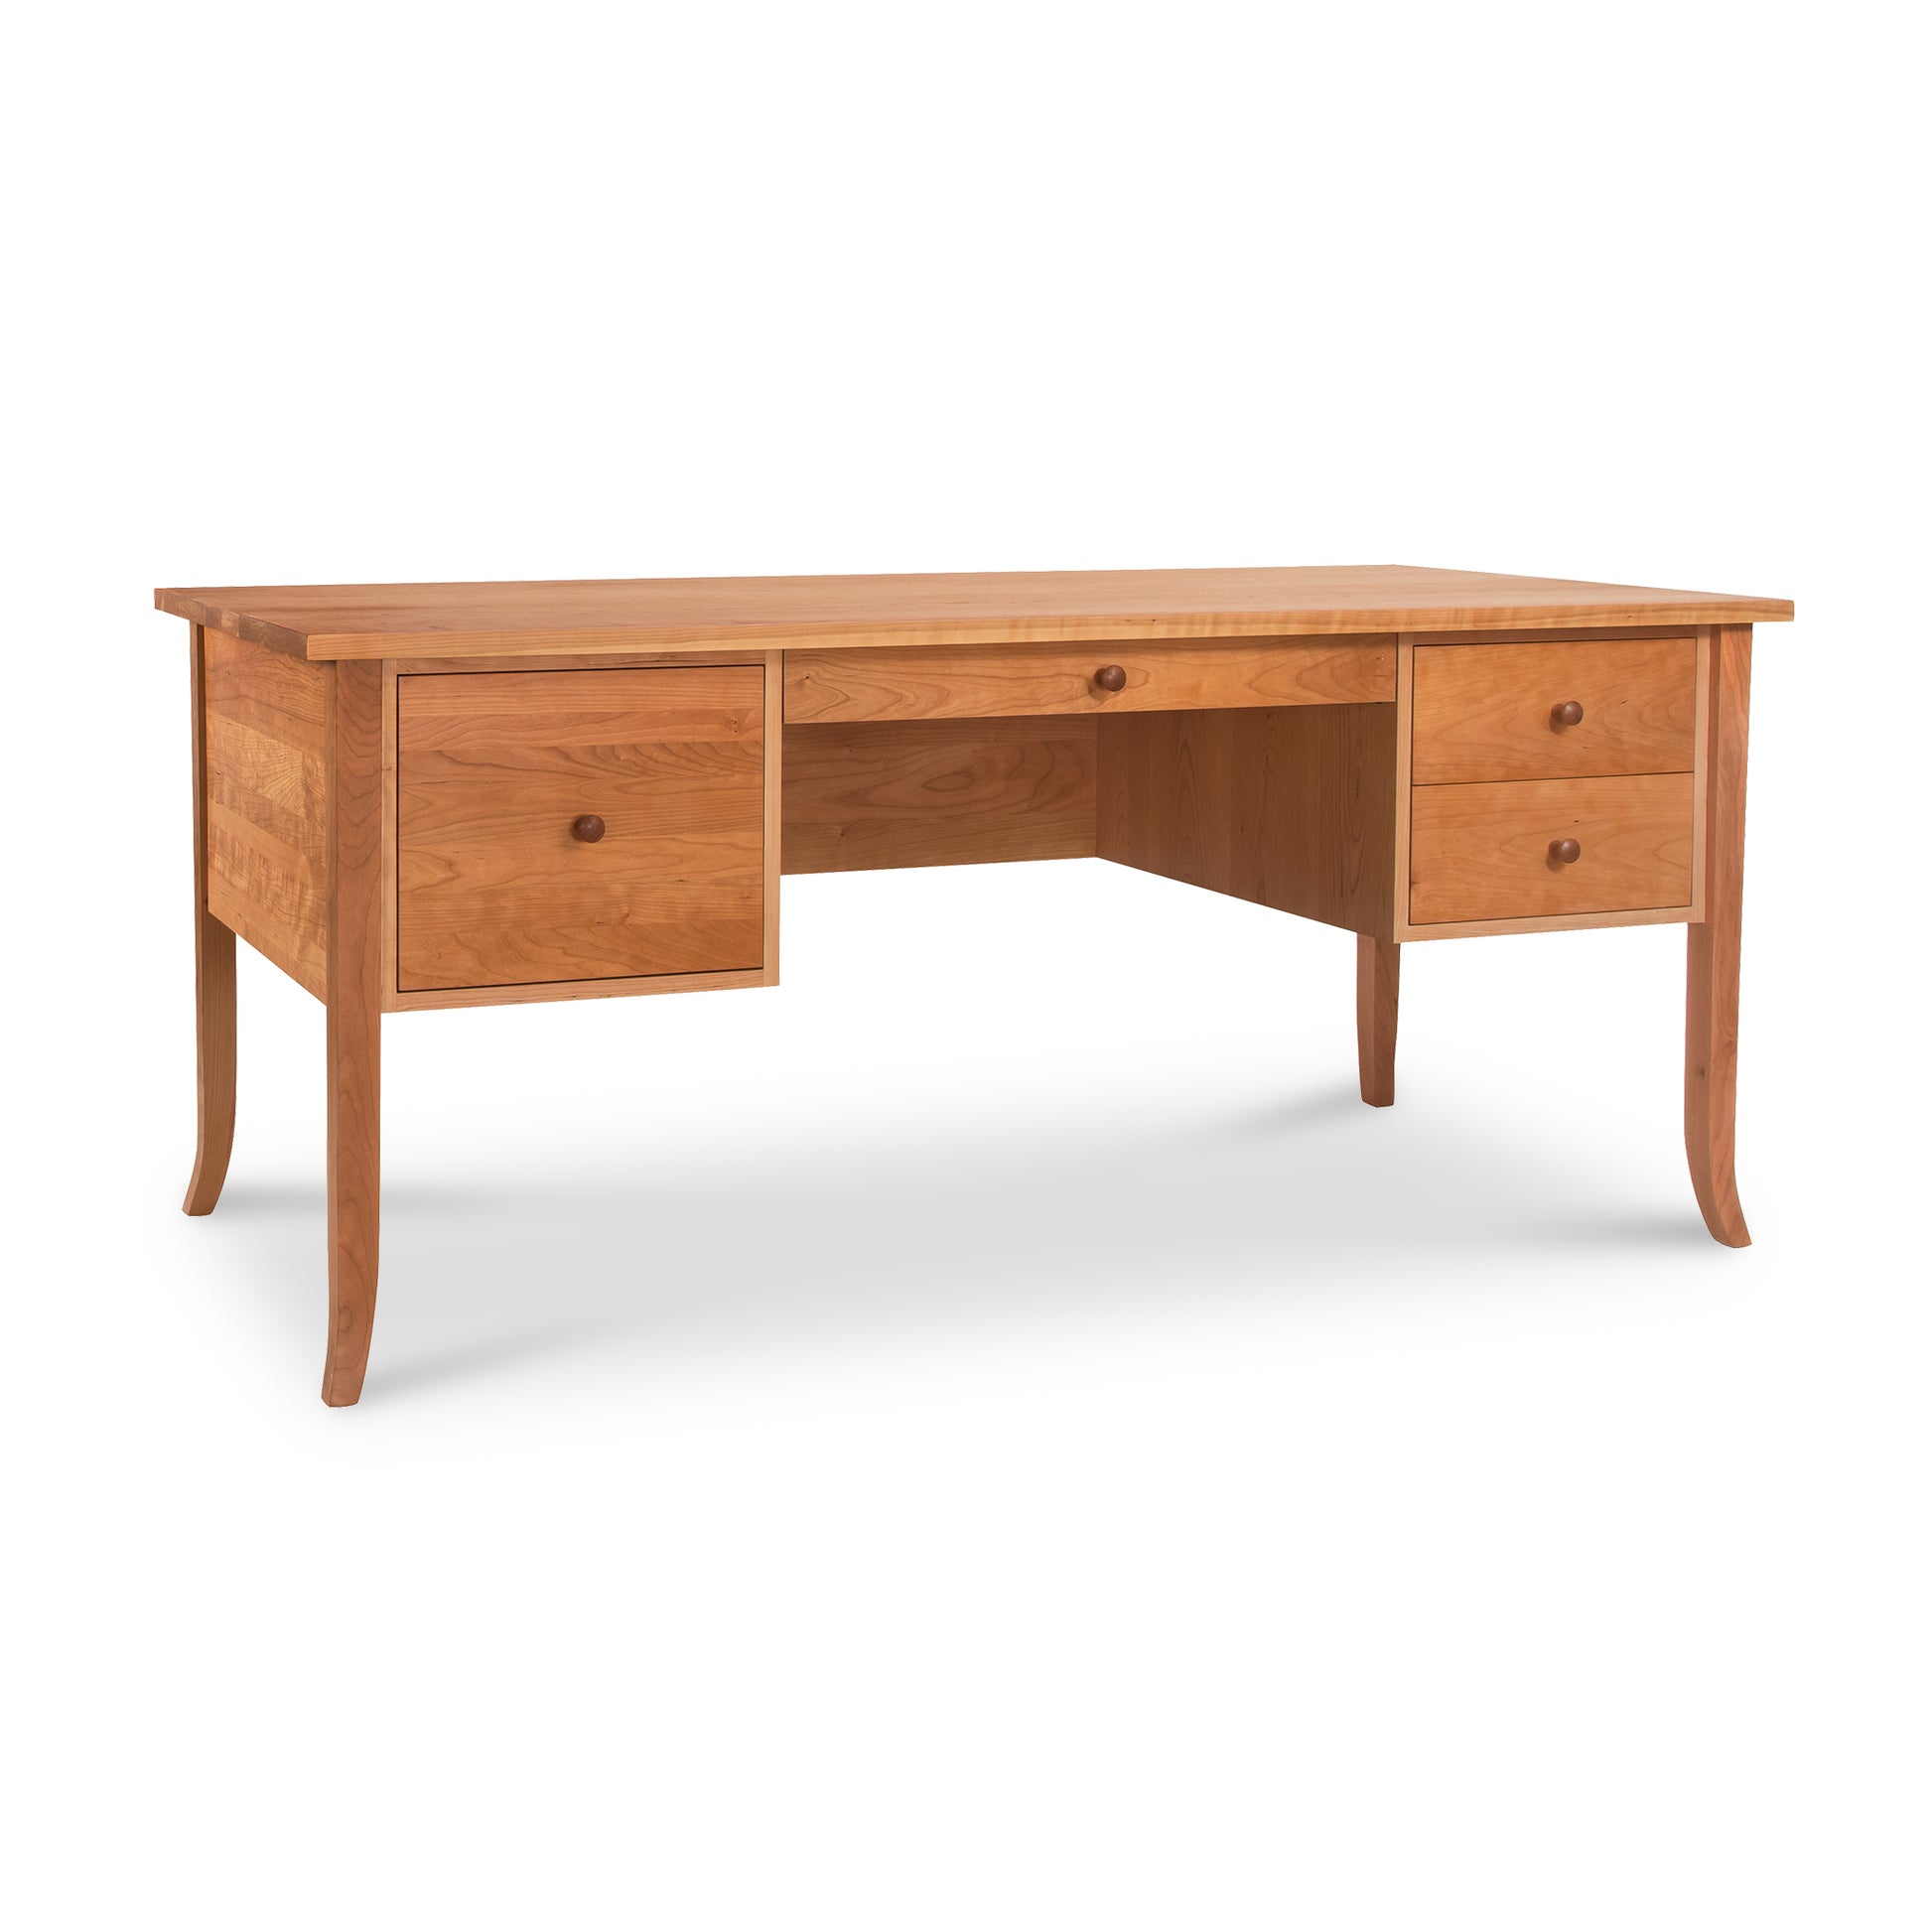 A handmade Large Wood Flare Leg Executive Desk, crafted from solid wood, with two drawers by Lyndon Furniture.